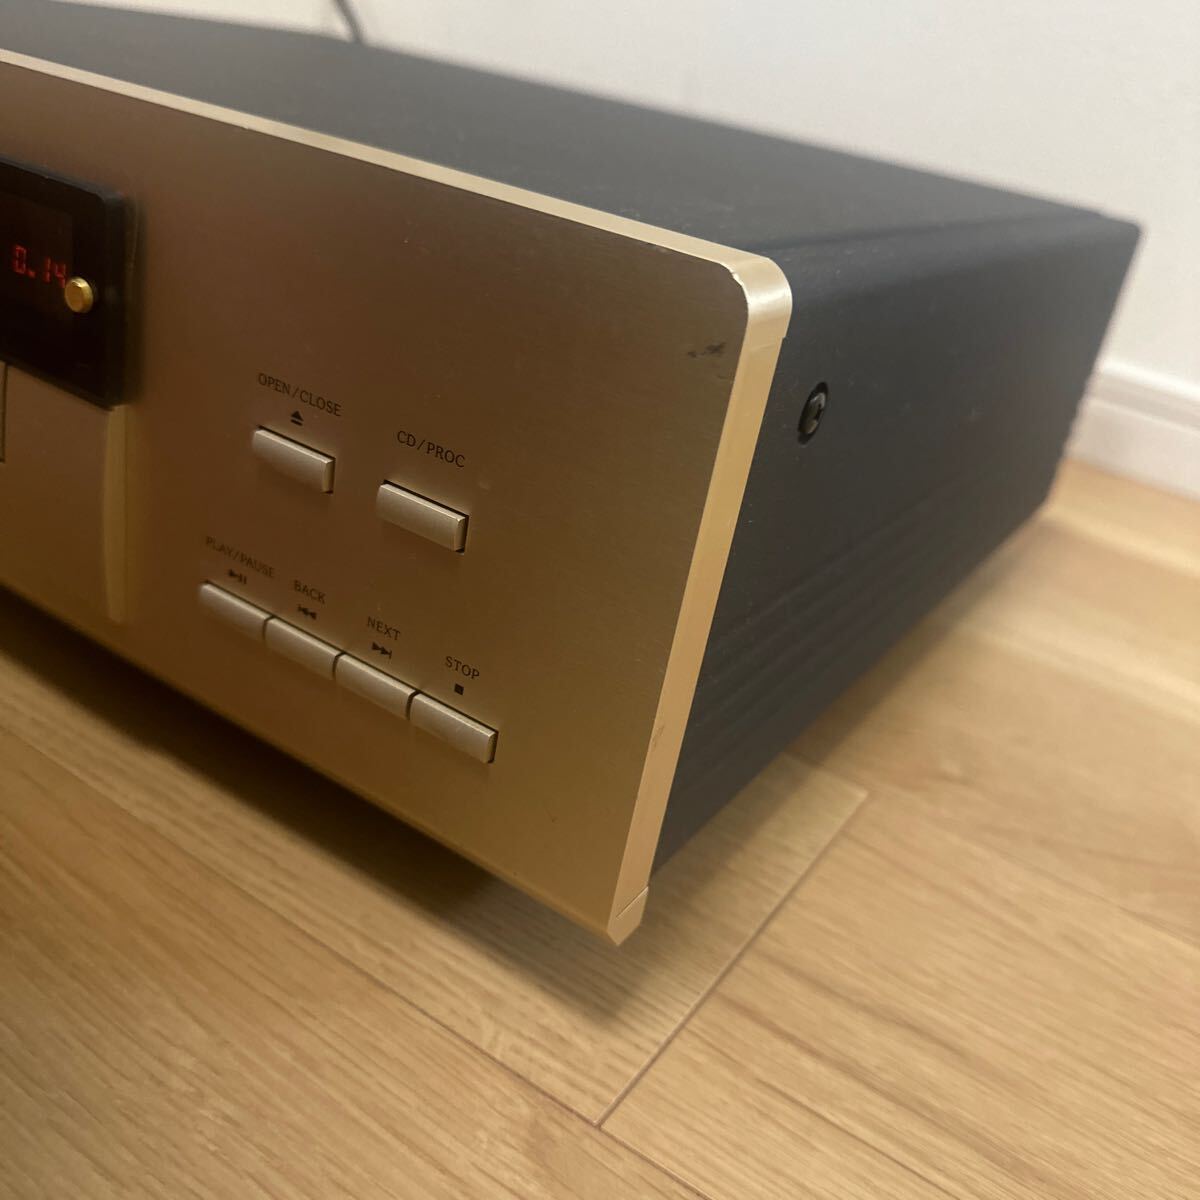  used *Accuphase Accuphase DP-67 CD player 